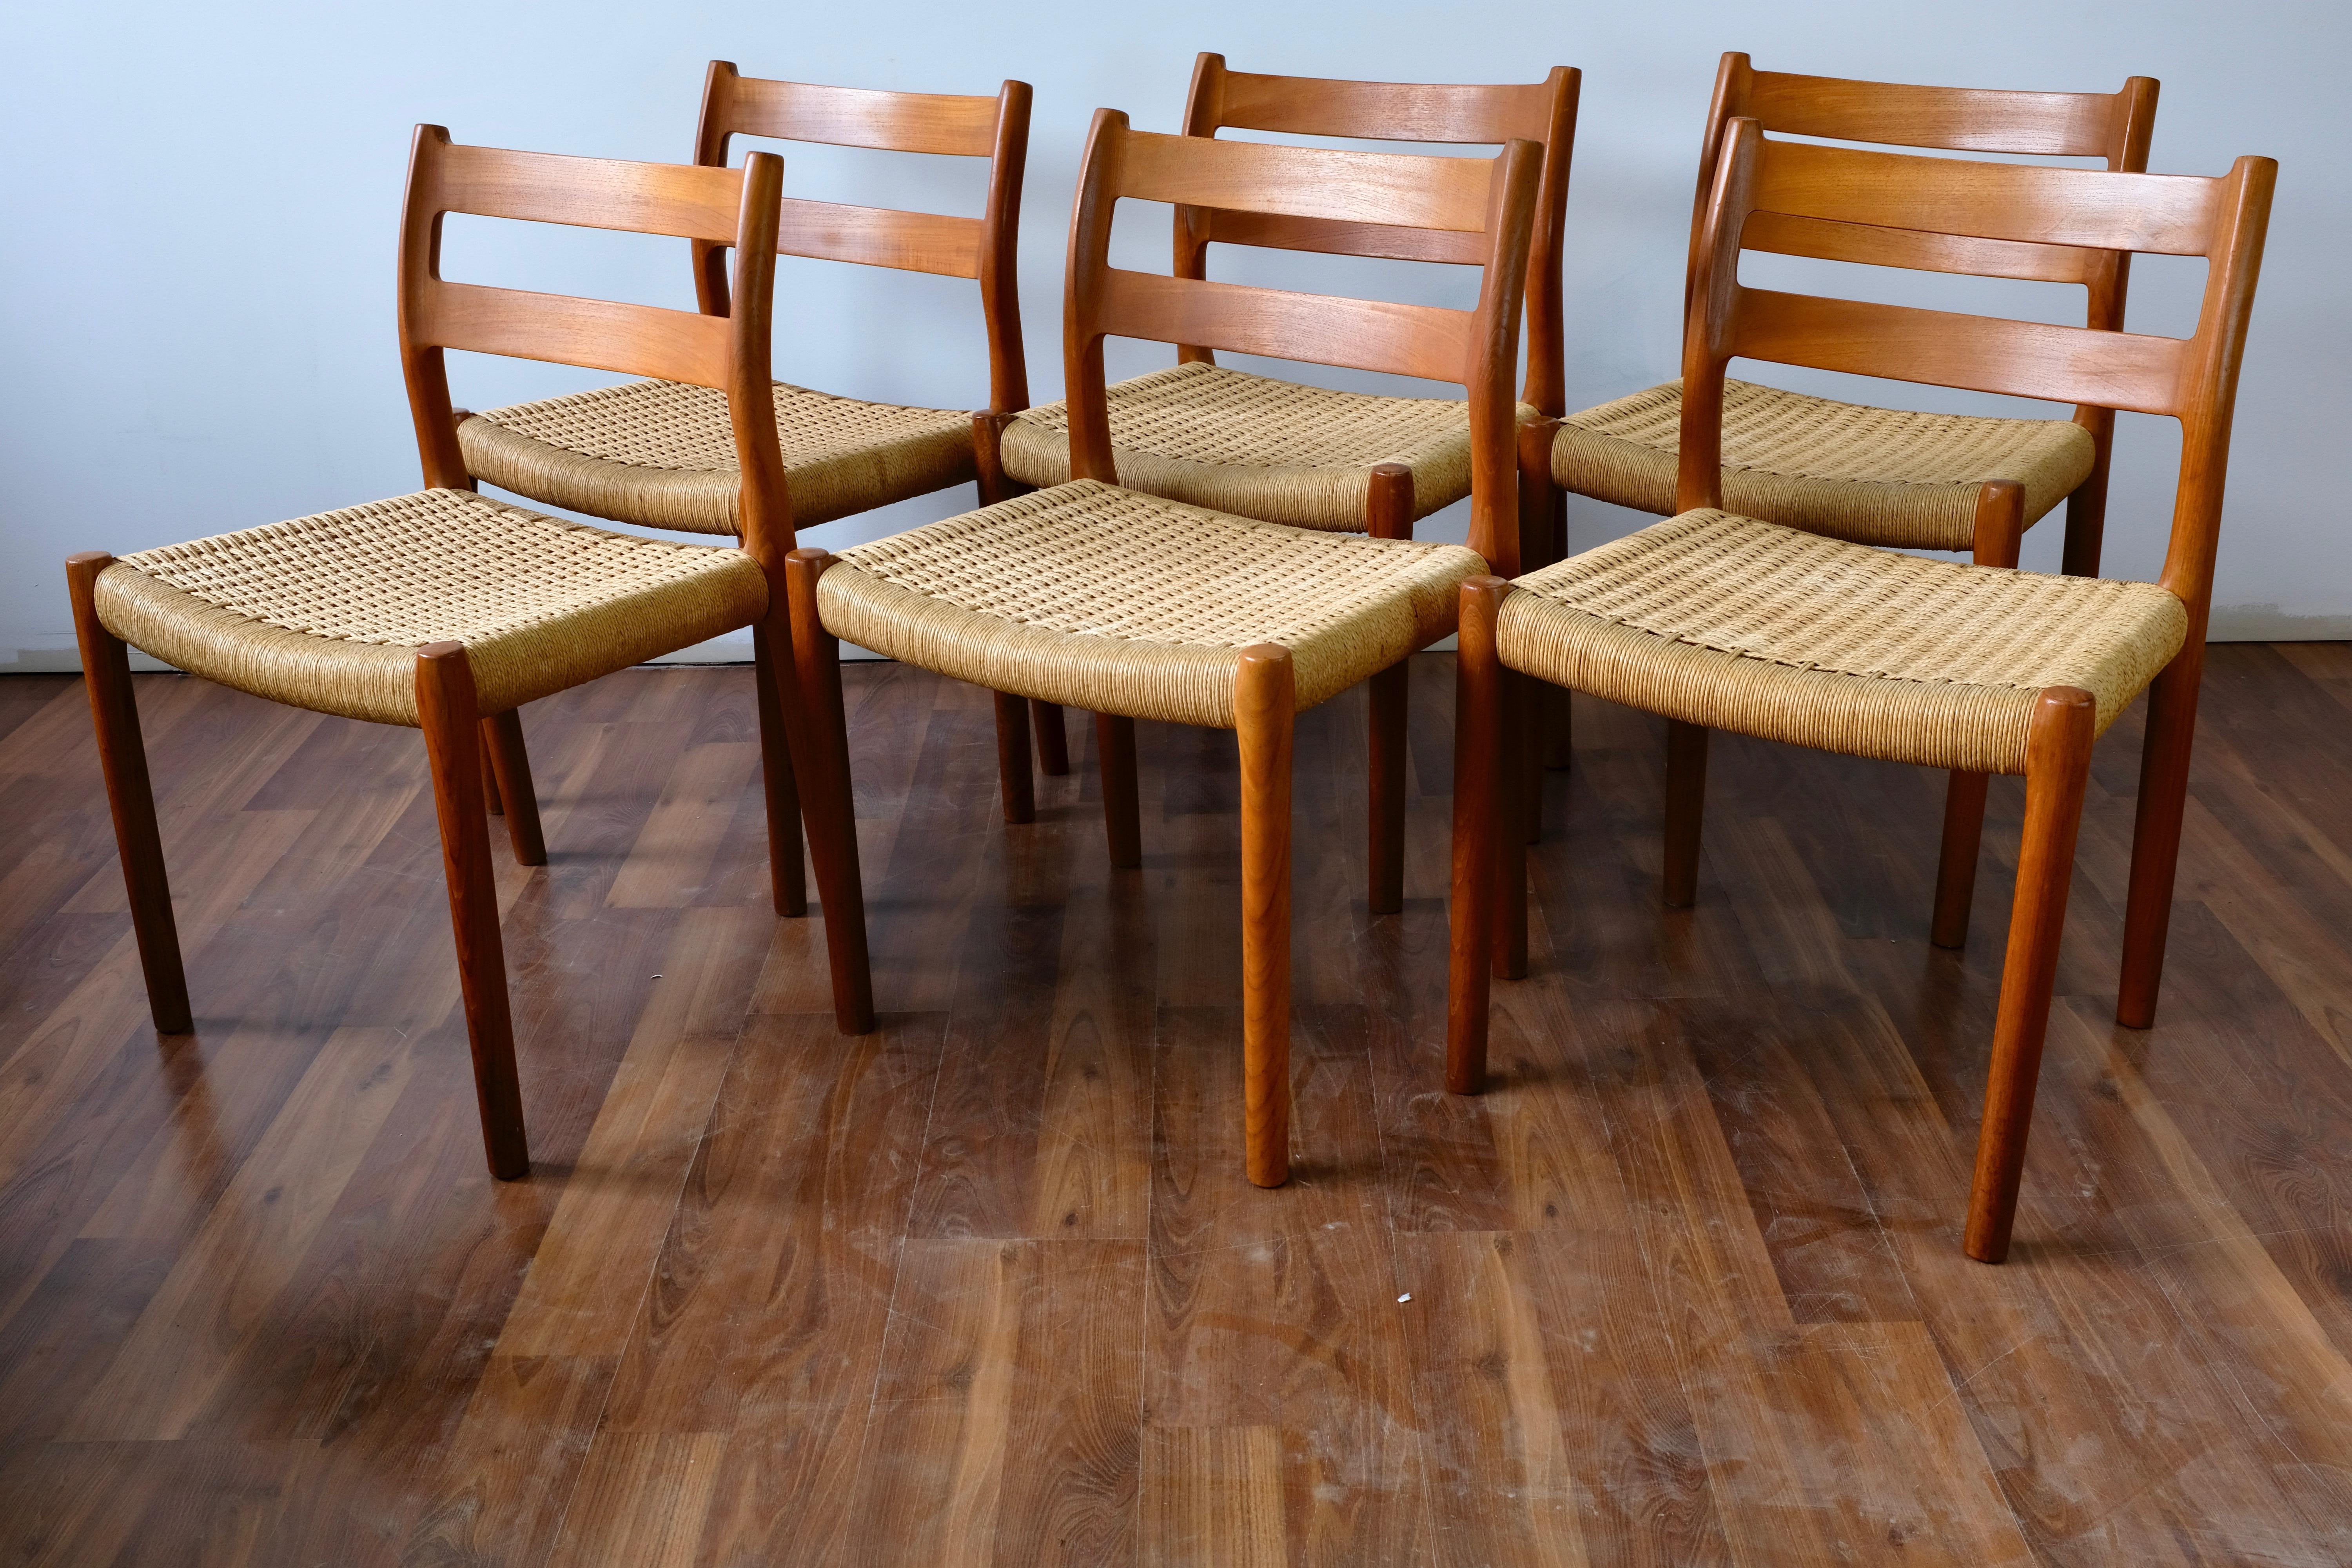 Set of 6 dining chairs designed by Niels Otto Møller and made in Denmark by J.L. Møllers Møbelfabrik.

The chairs have solid teak frames and papercord seats. They are in very good condition but show some wear at the bottoms of the legs and on the